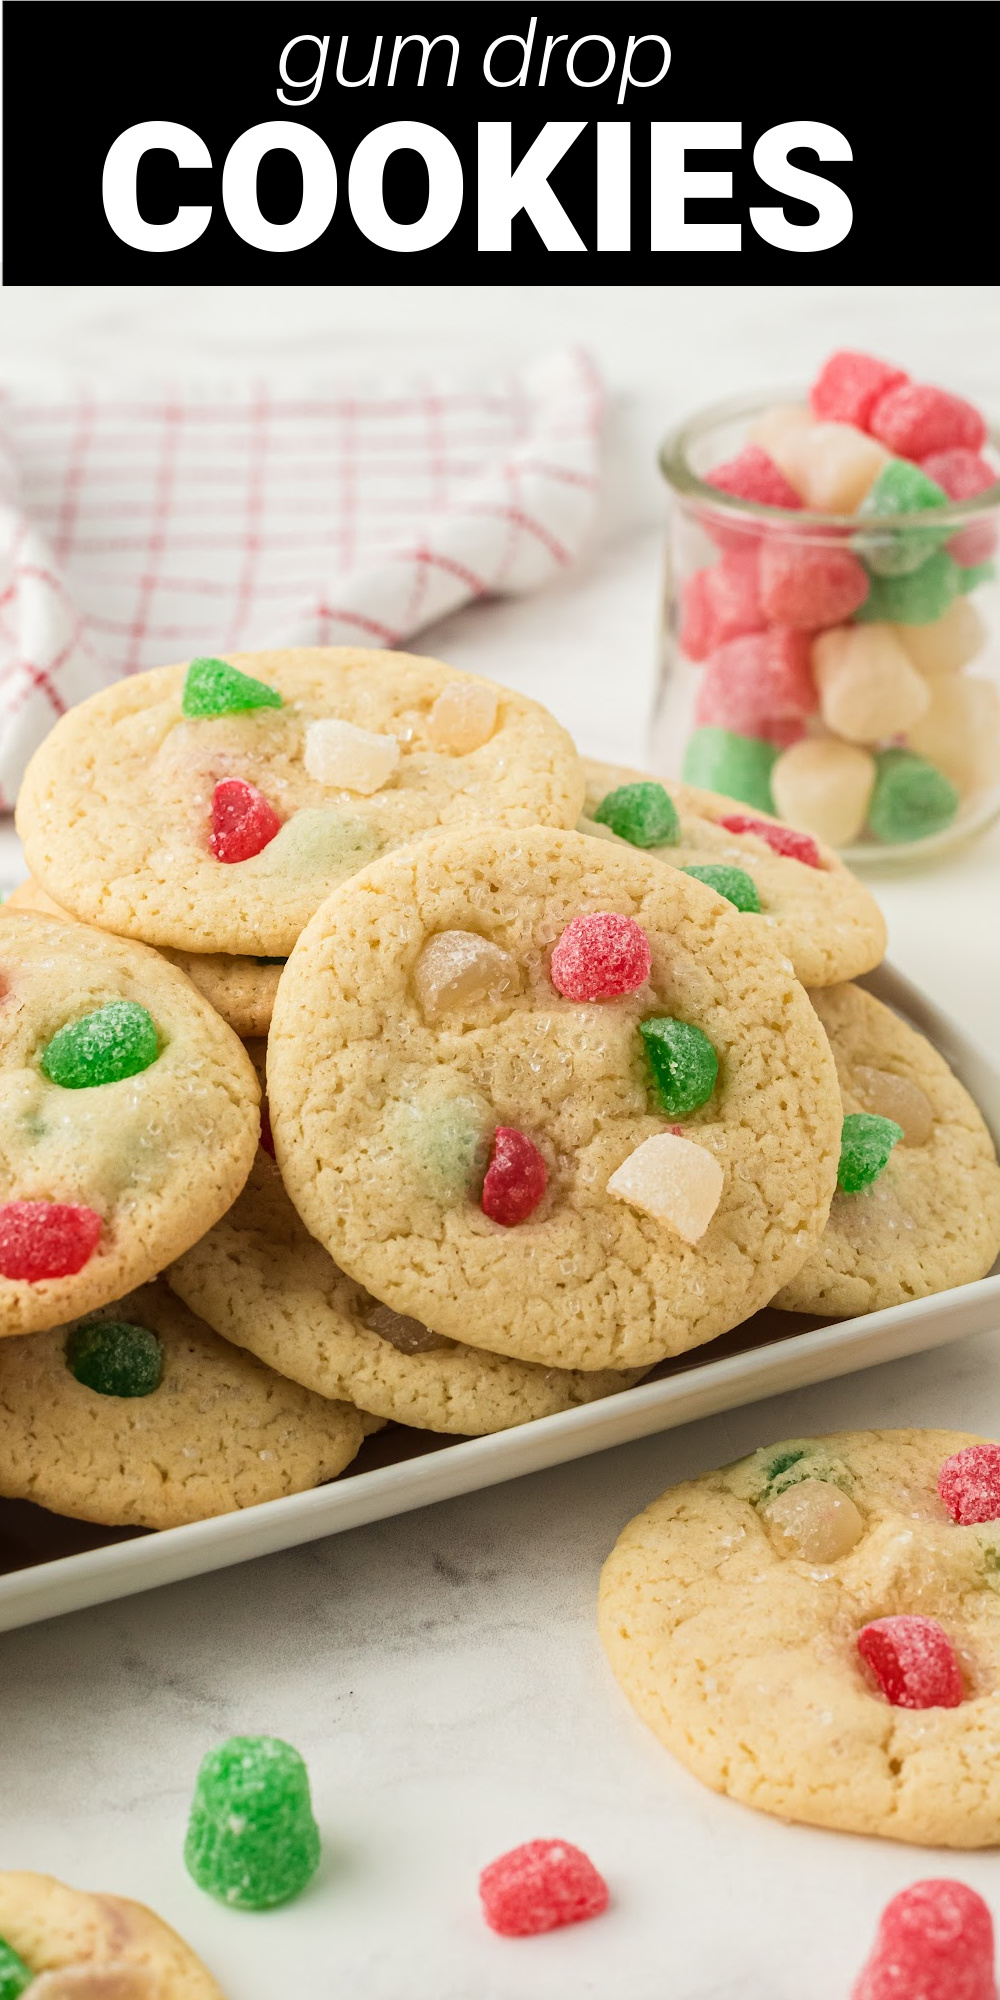 These soft and chewy old-fashioned Gumdrop Cookies will take you straight back to your childhood. Sugar cookies studded with colorful gumdrops will make the most delicious Christmas Cookies this holiday season.